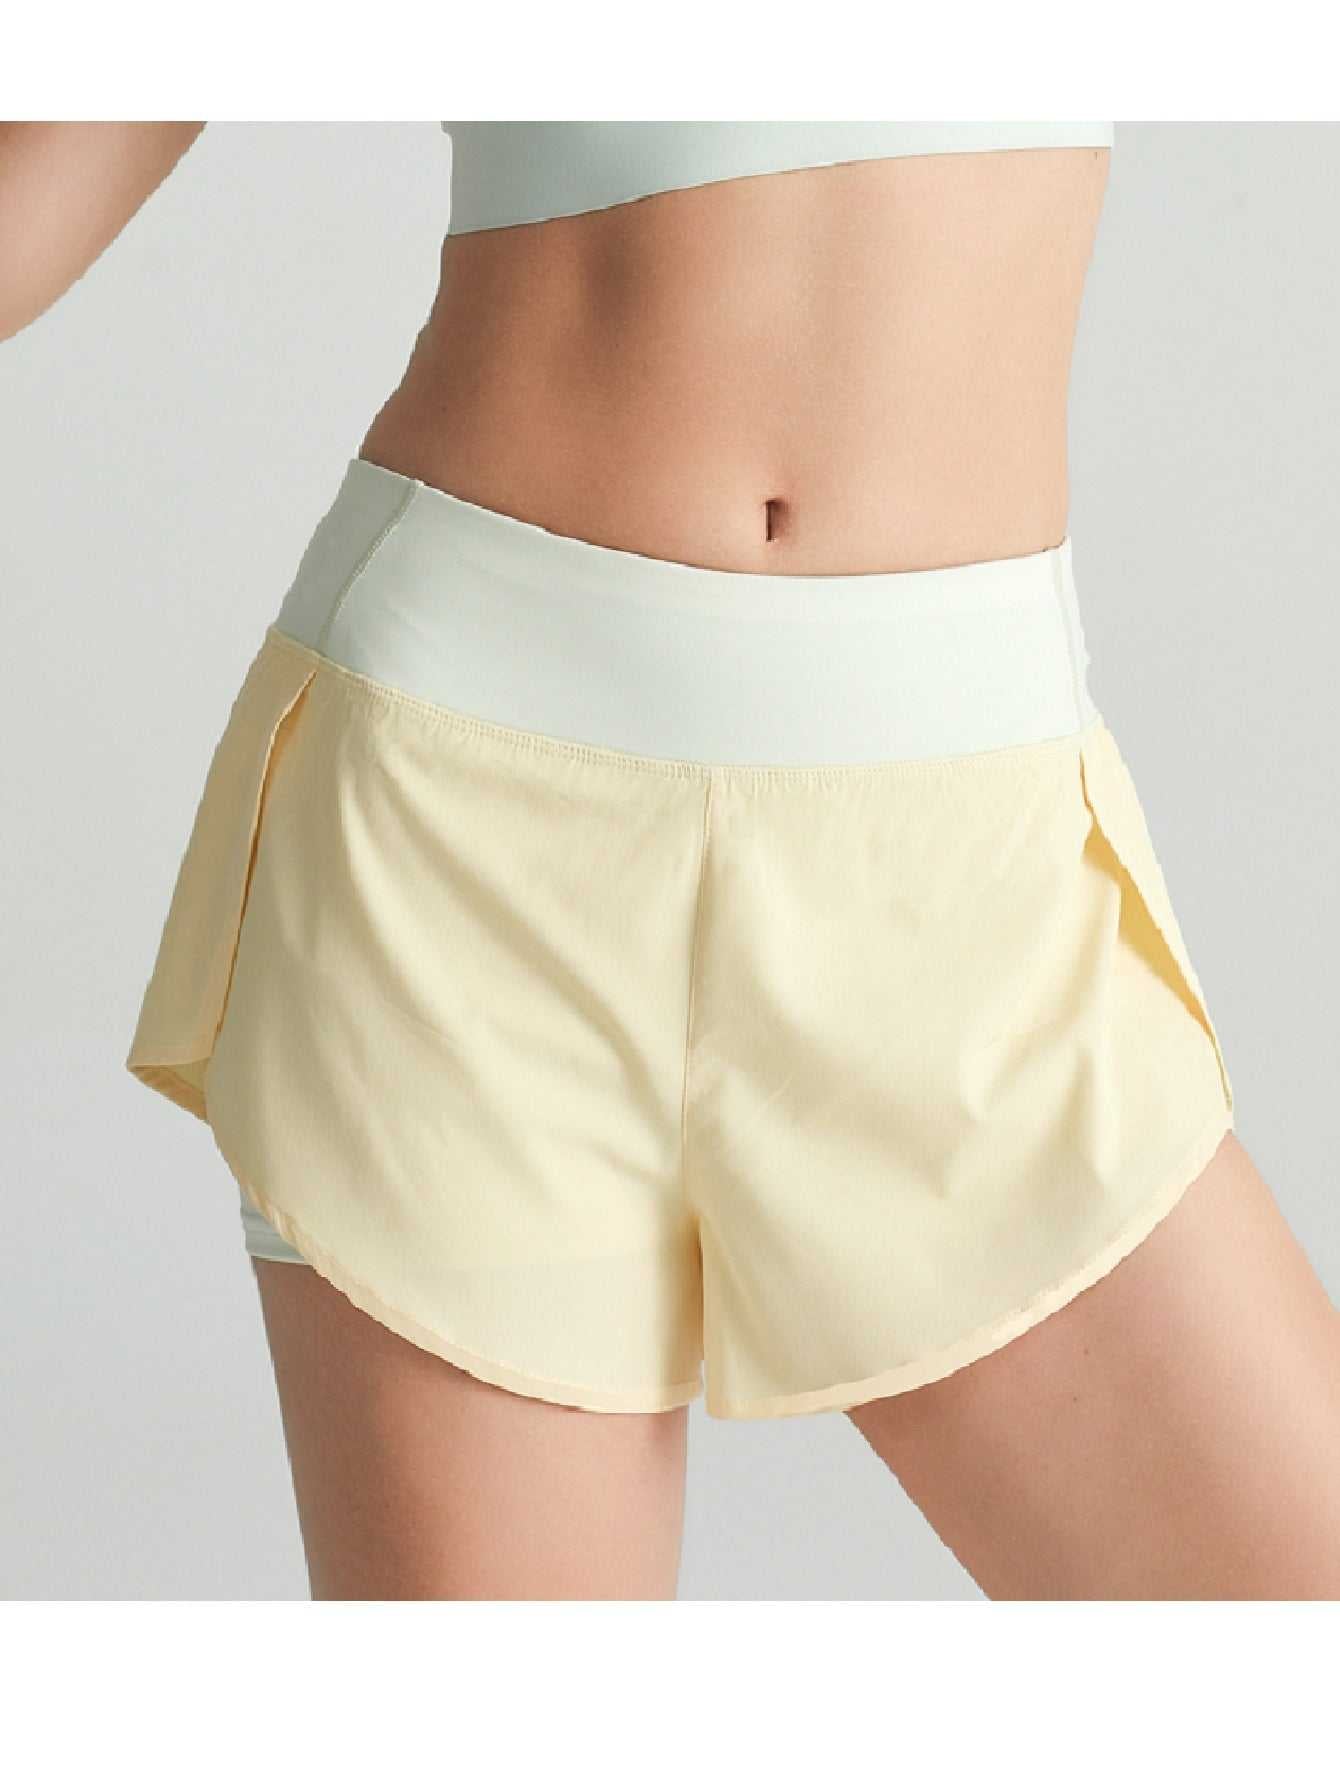 Wide Band Elastic Waist 2 in 1 Sport Shorts With Phone Pocket Sai Feel